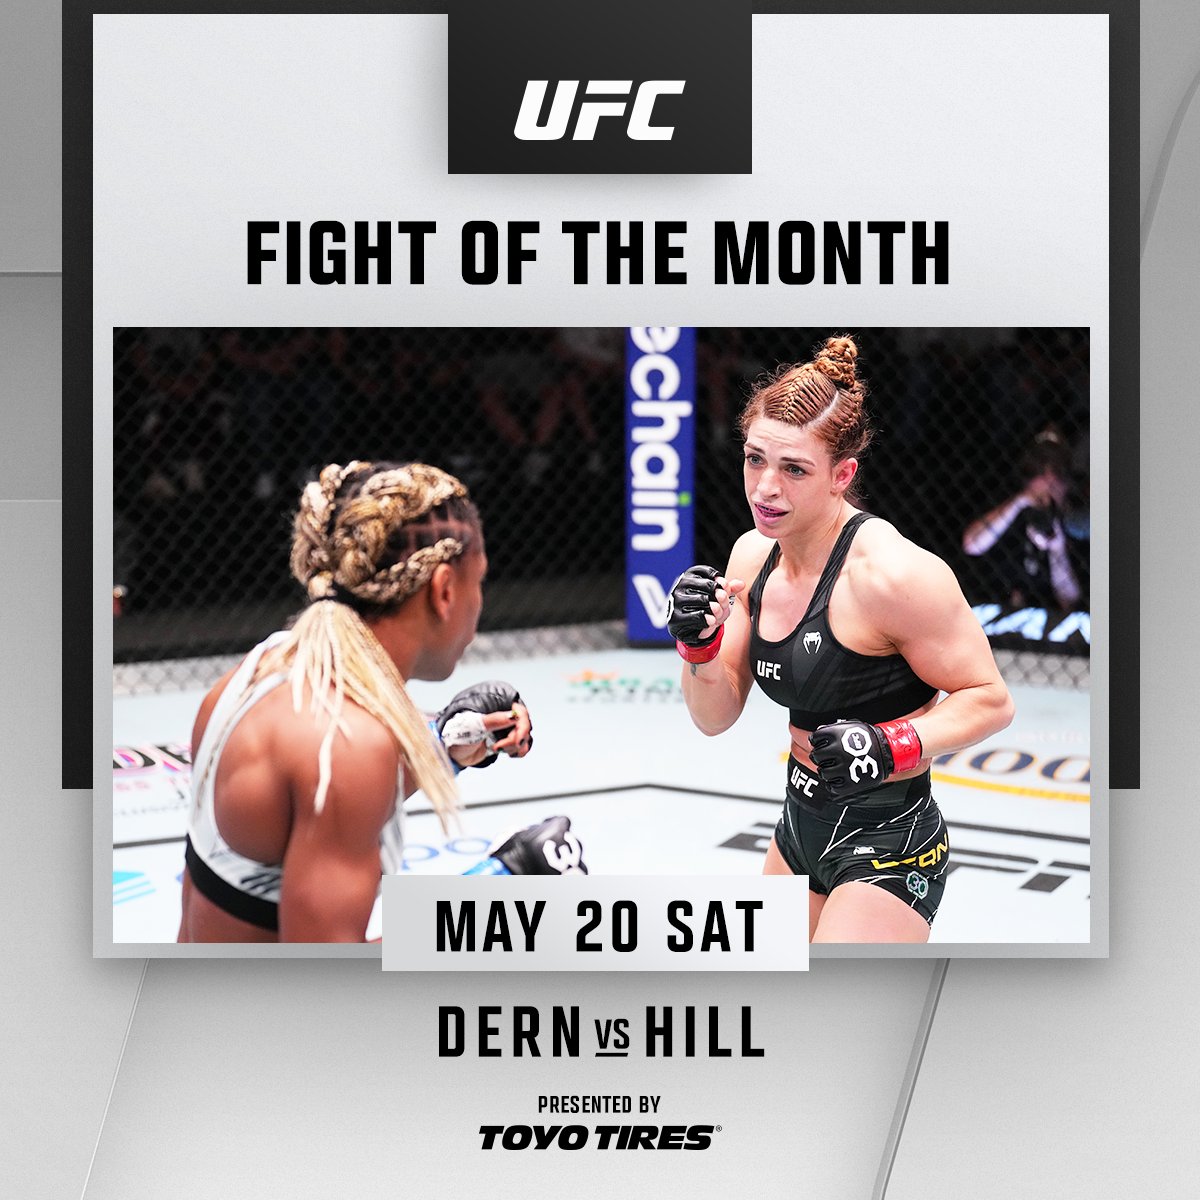 An epic, 5-round battle between these two ladies earns your FOTM honors for May 👏👏👏

@MackenzieDern @AngieOverkill | B2YB @ToyoTires